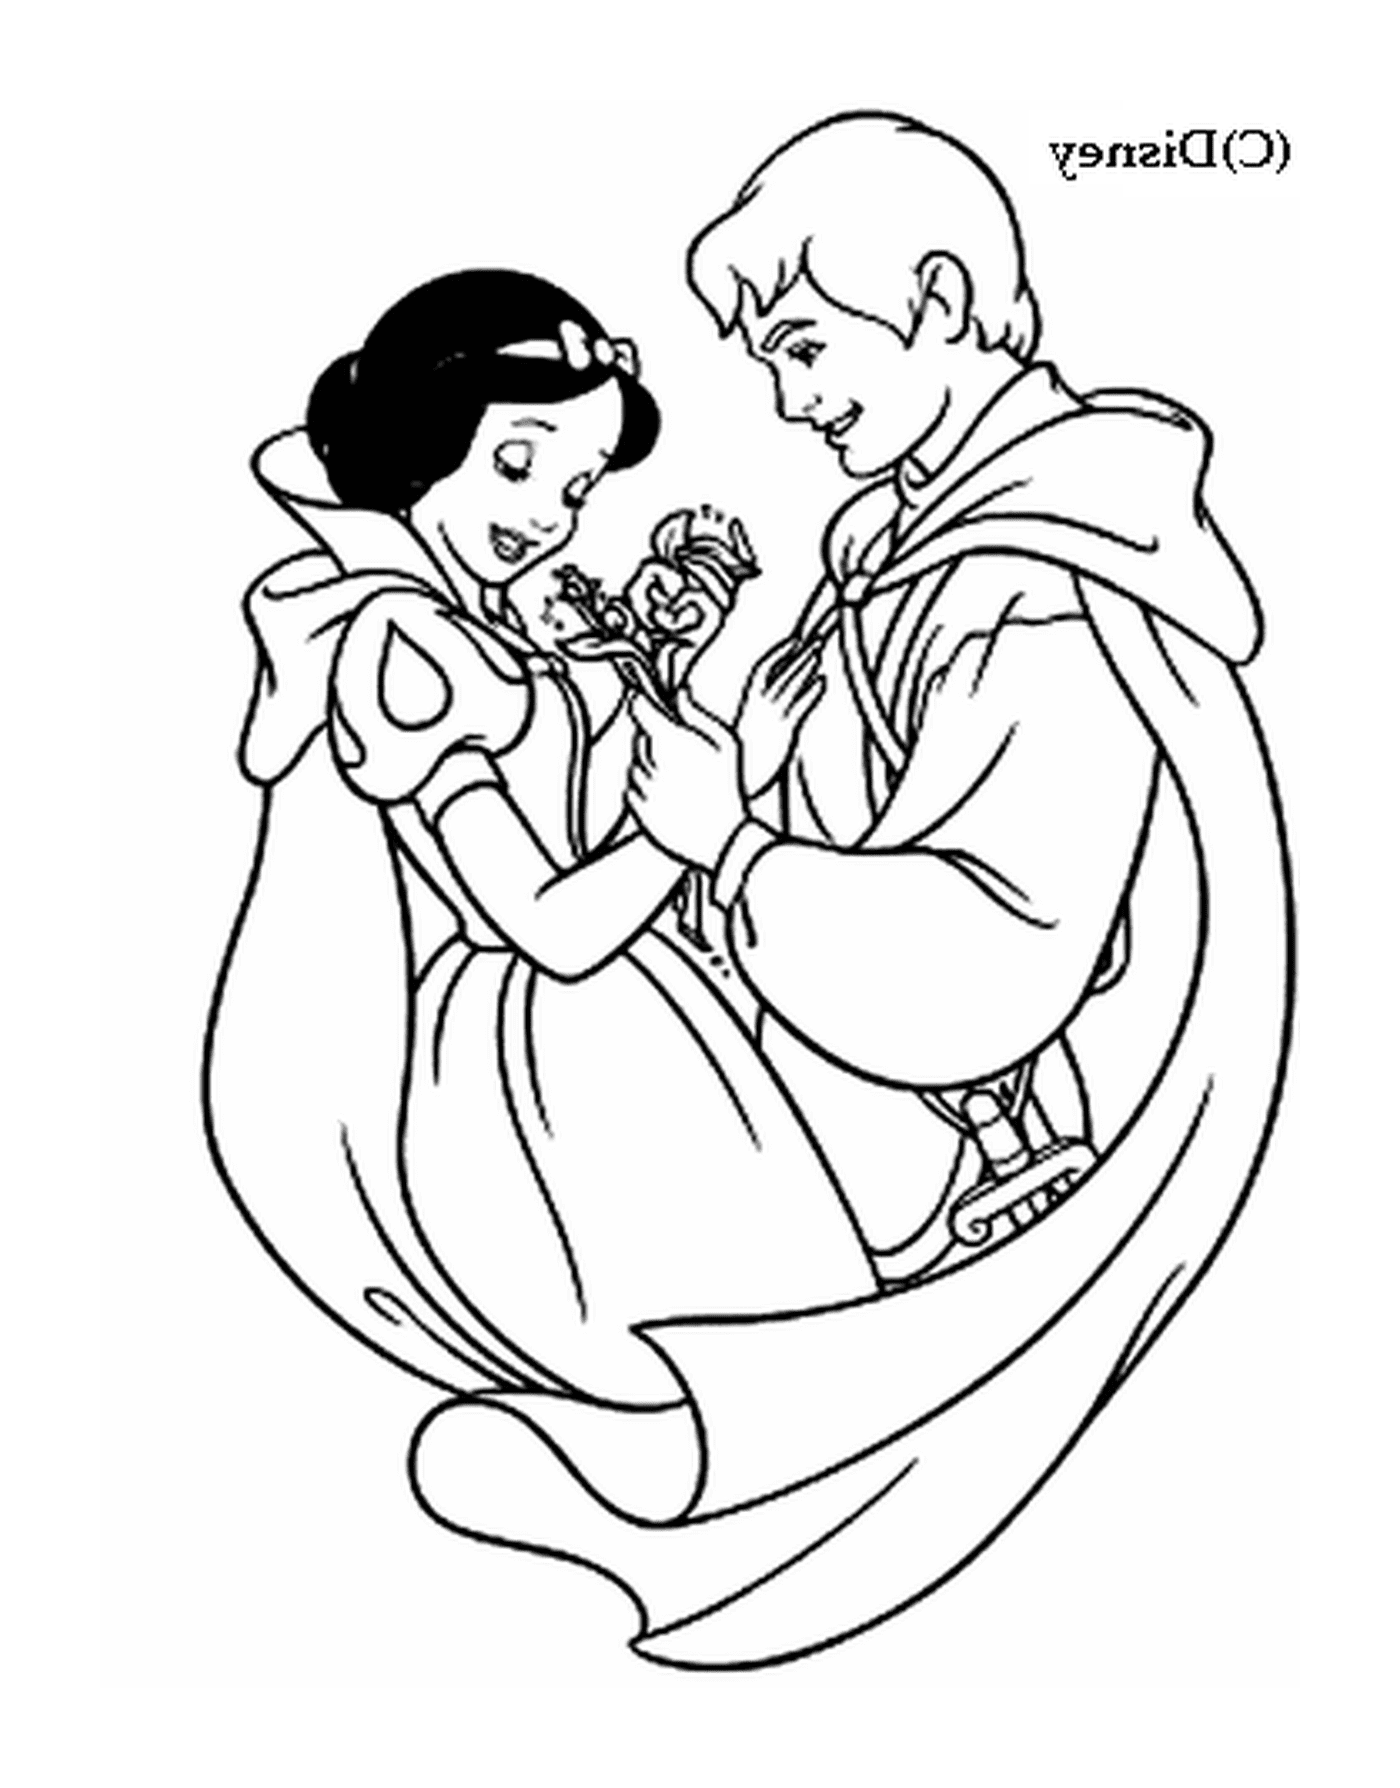  Snow White and Prince Charming 